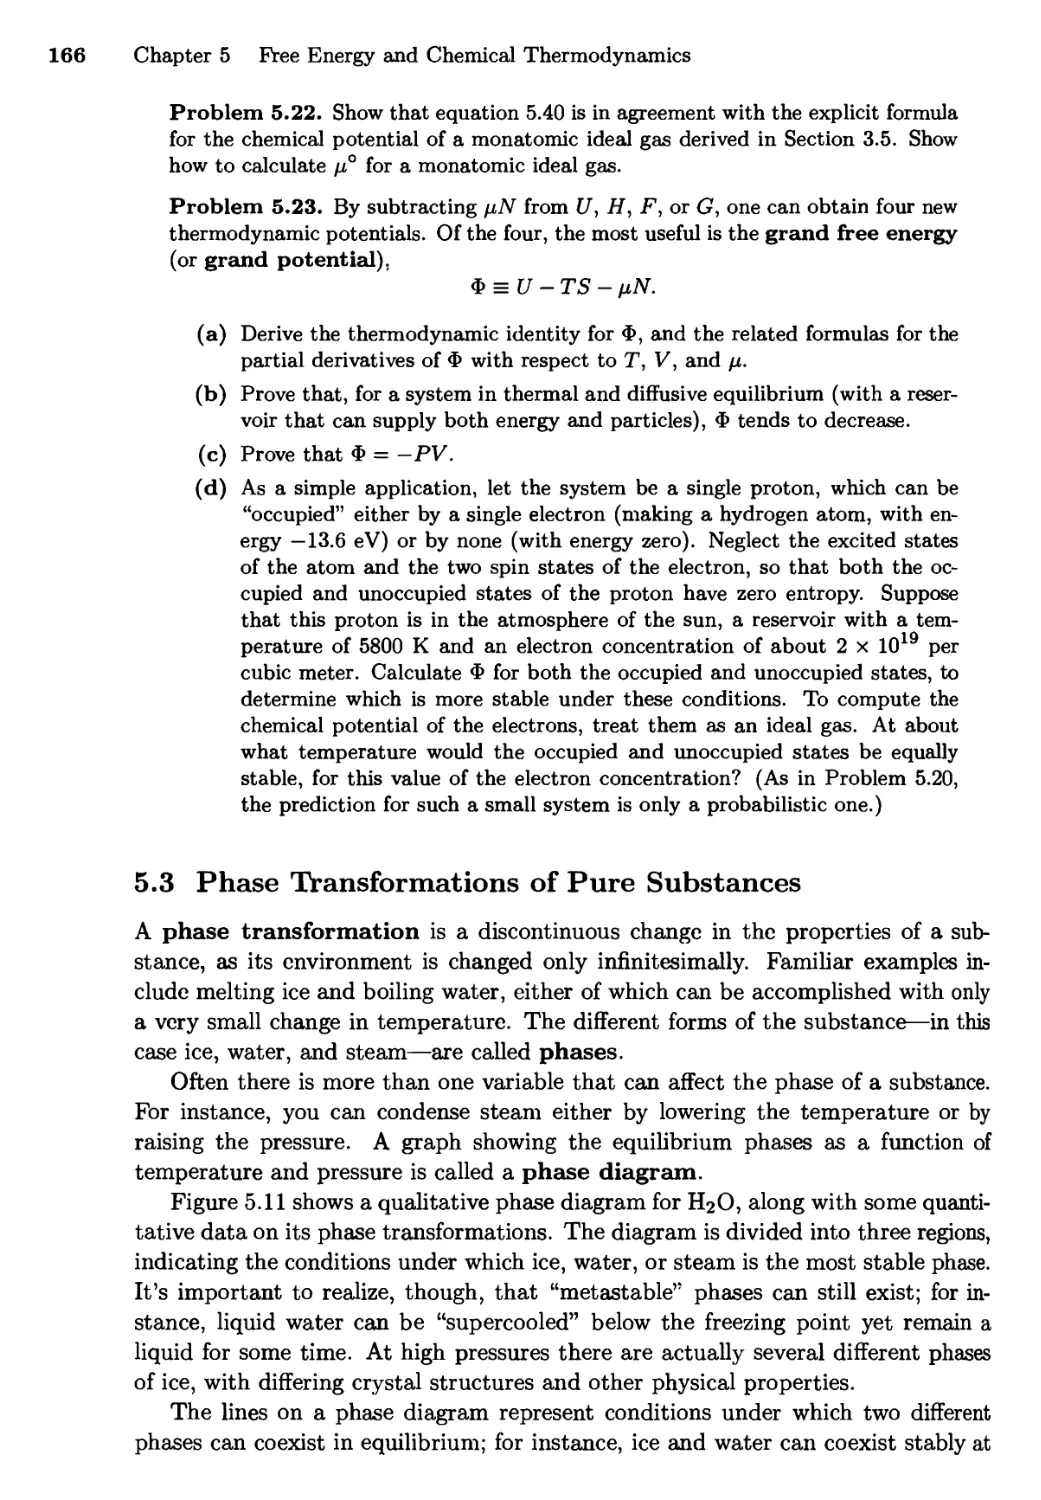 5.4 Phase Transformations of Pure Substances